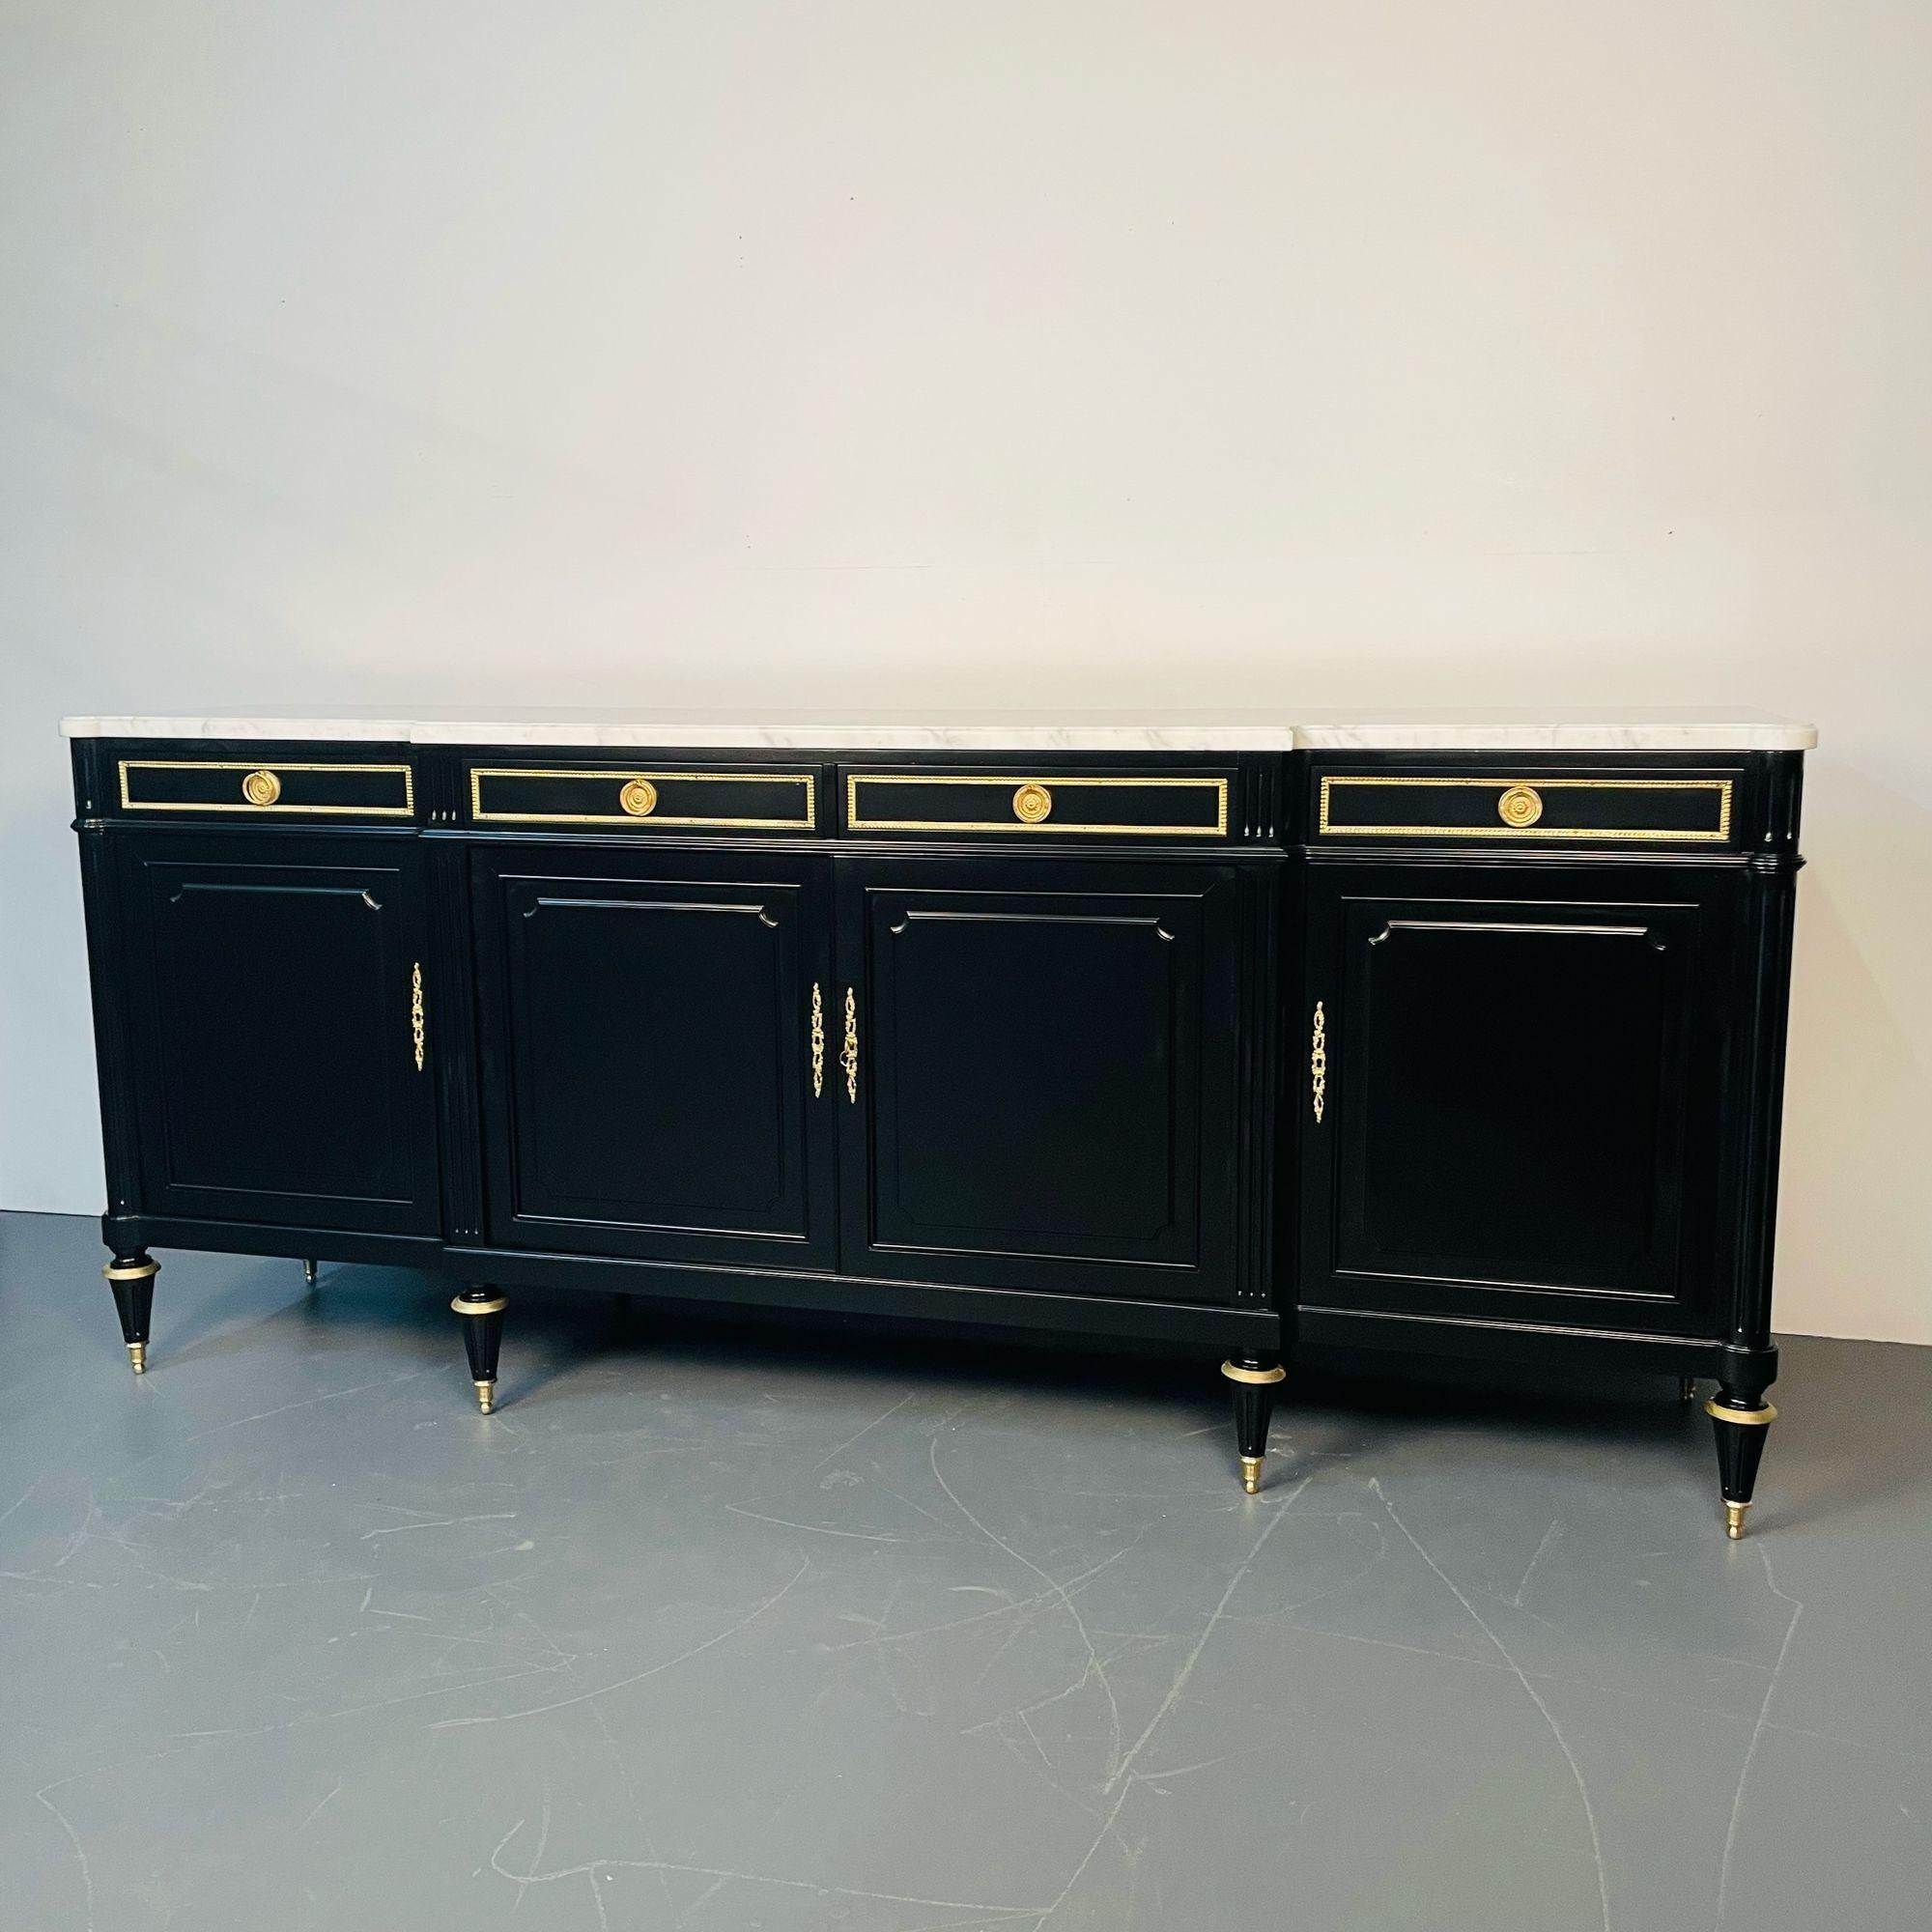 French Louis XVI Hollywood Regency Style Ebony sideboard, cabinet, Maison Jansen
 
This large and impressive recently refinished ebonized wood Maison Jansen style bronze mounted cabinet or sideboard is absolutely flawless. Having four doors in